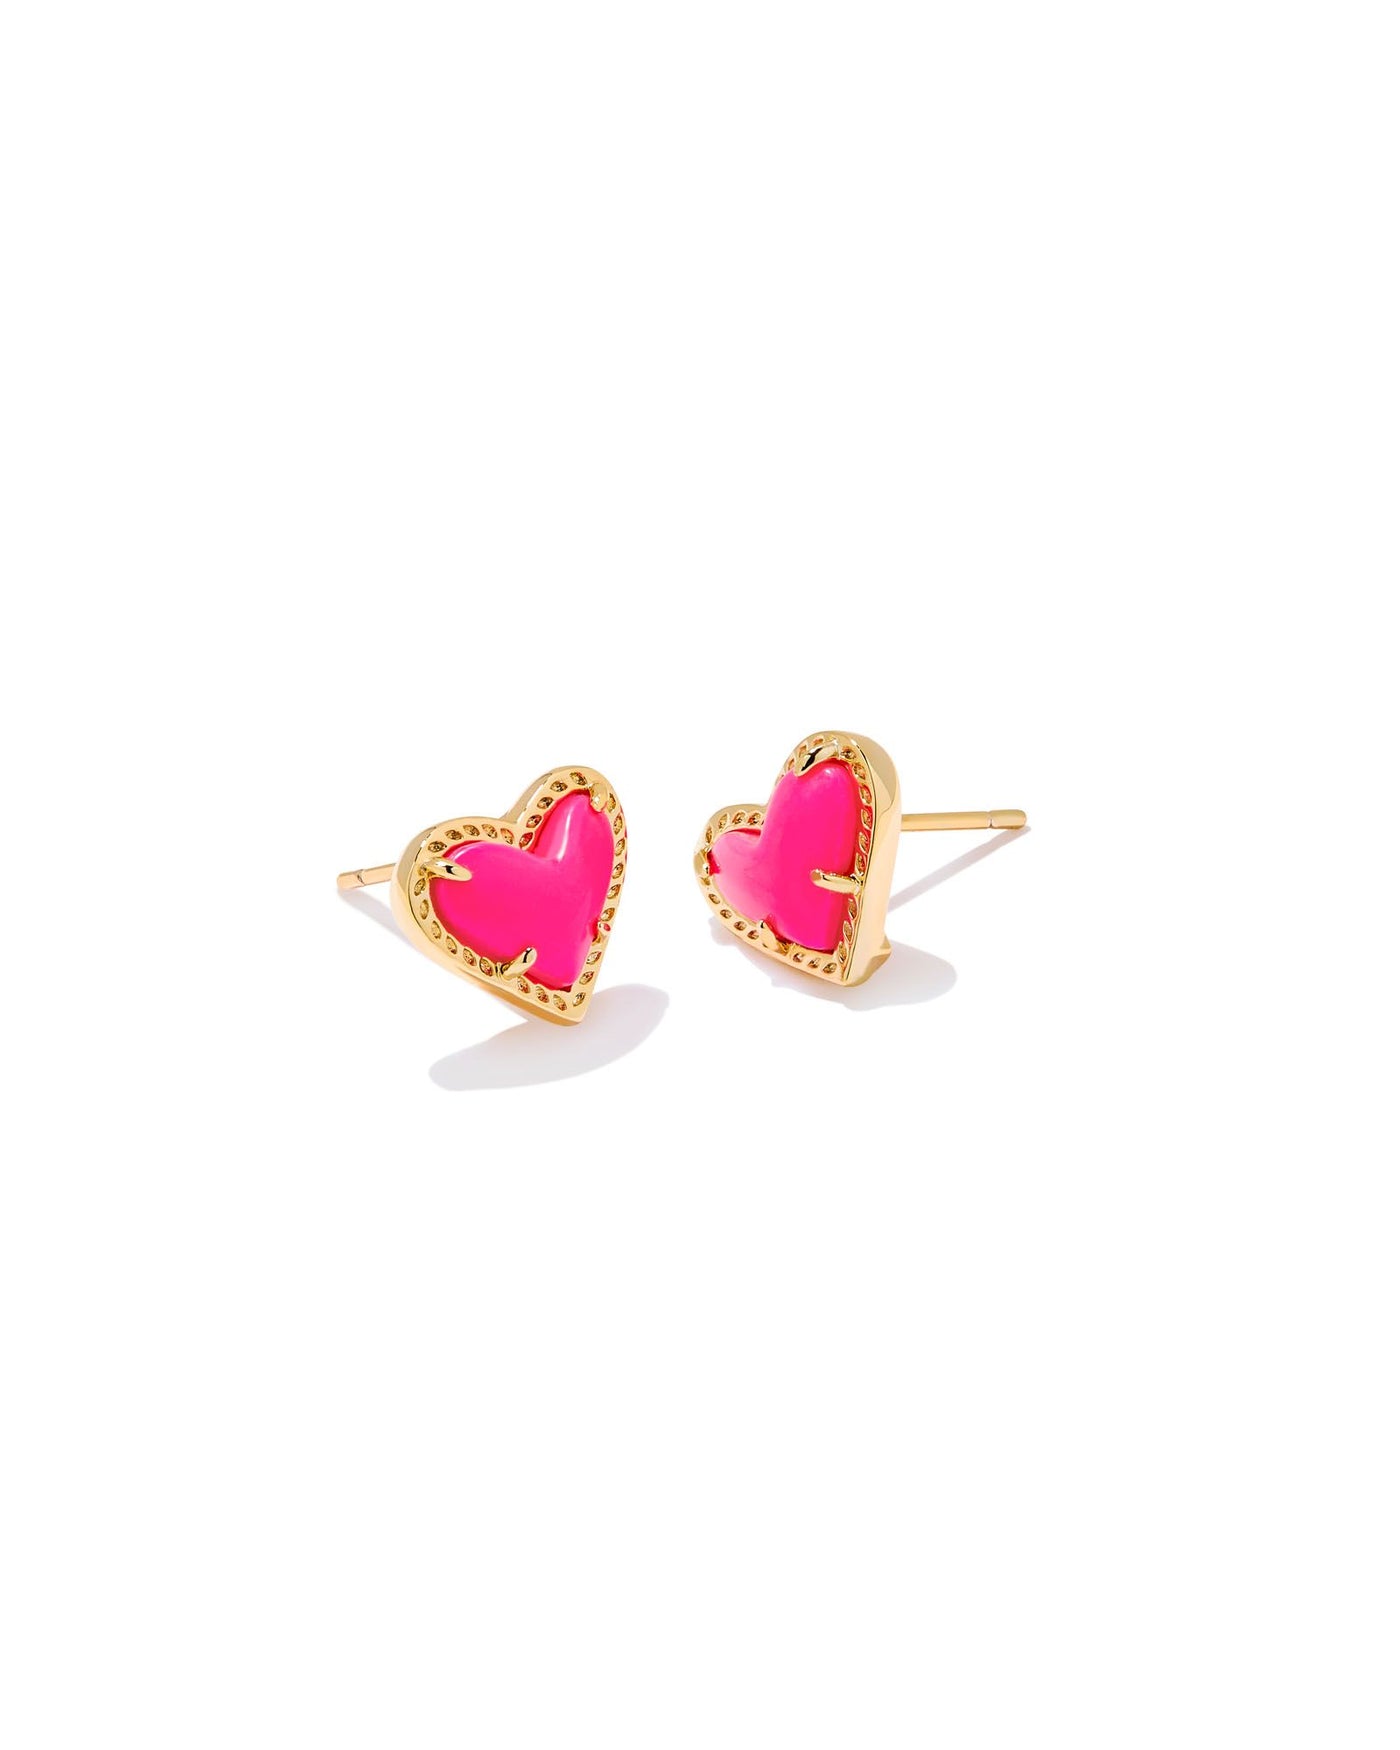 Kendra Scott Ari Heart Stud Earrings Gold Neon Pink-Earrings-Kendra Scott-Market Street Nest, Fashionable Clothing, Shoes and Home Décor Located in Mabank, TX